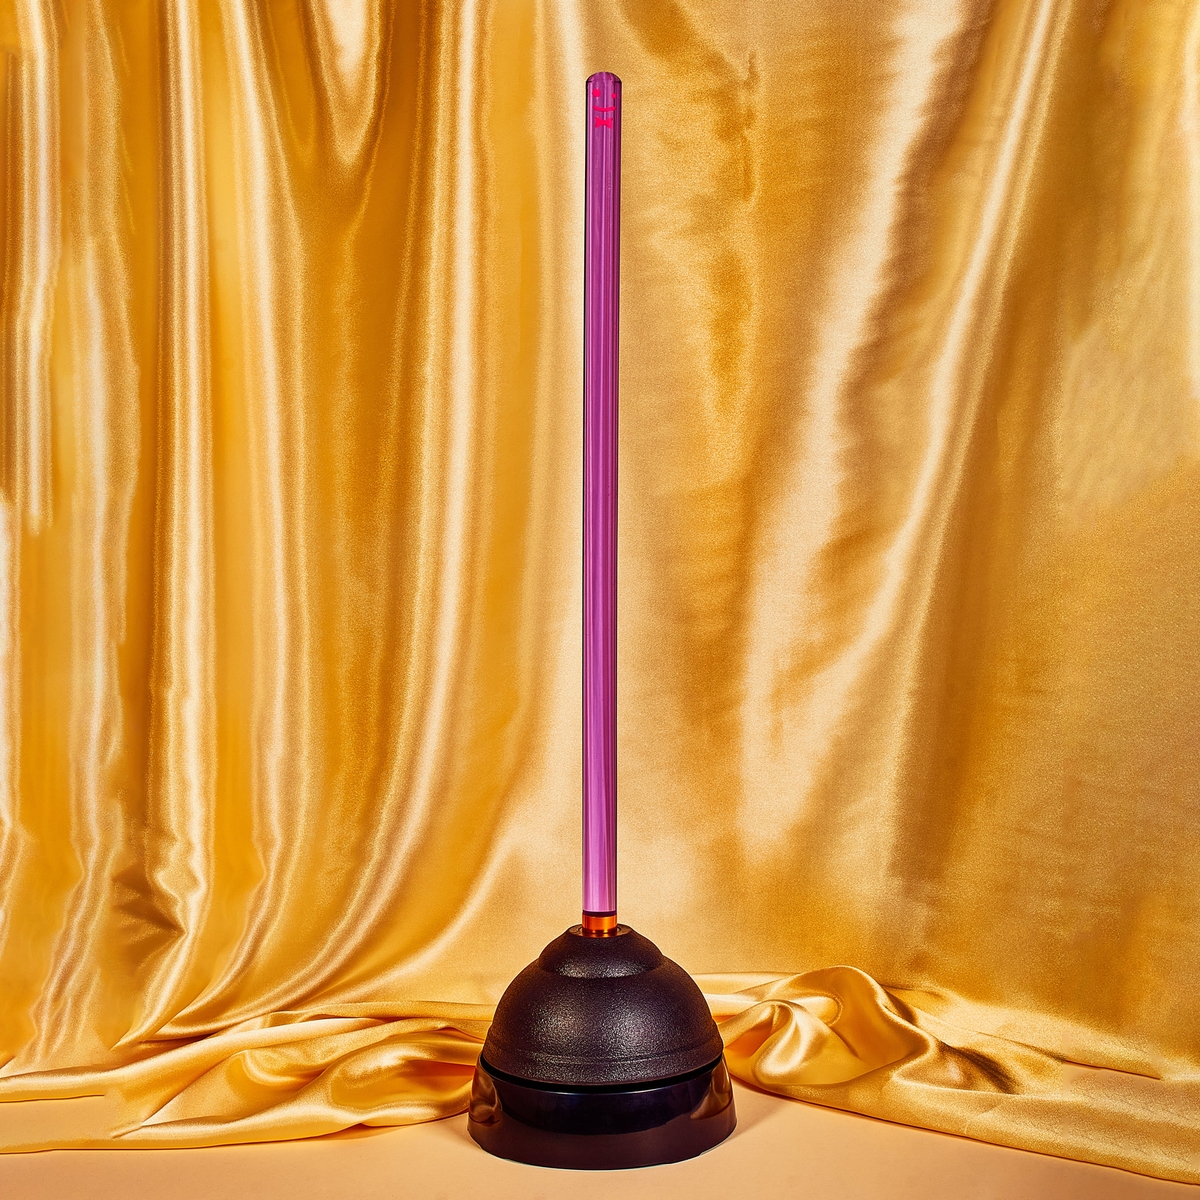 Plungers and Toilet Brushes Can Be Pretty! » This Little Miggy